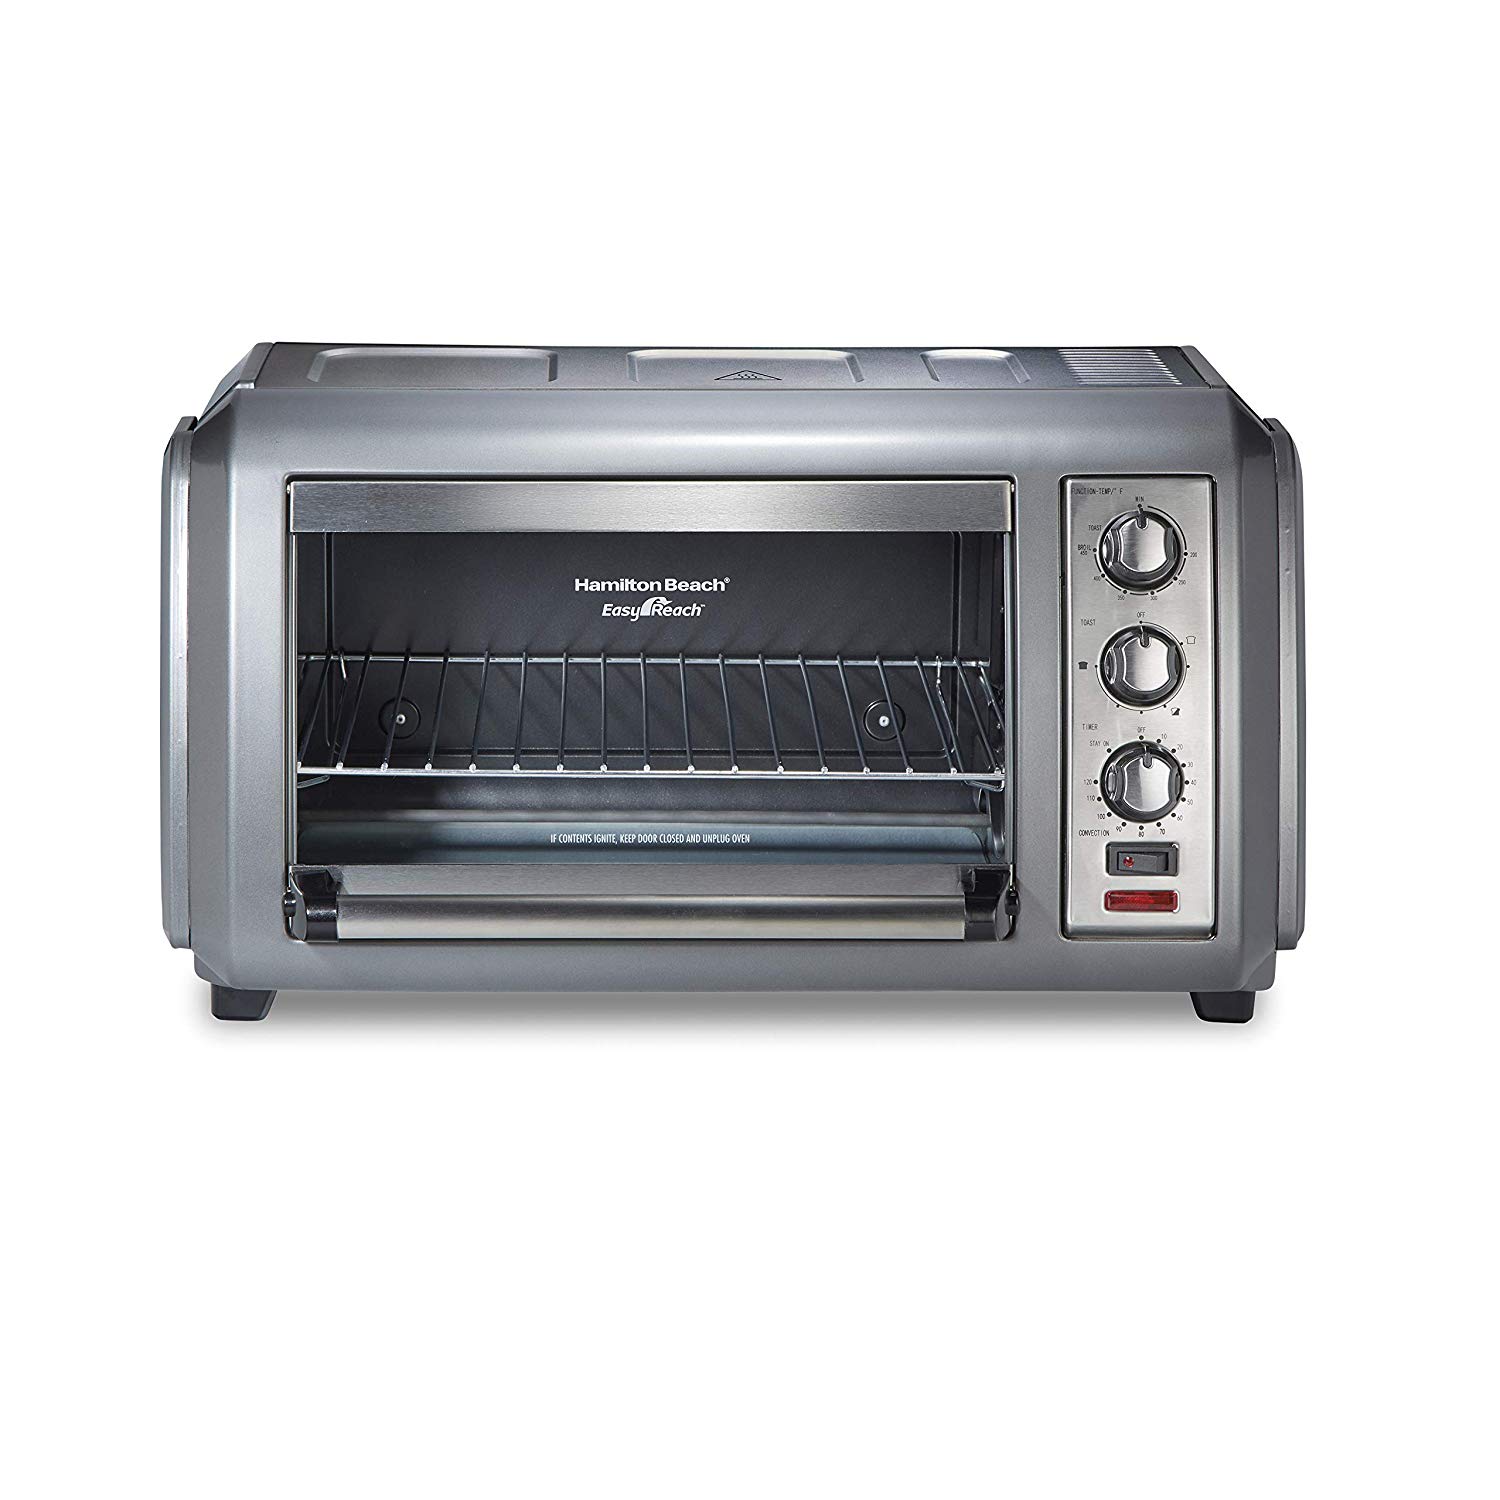 An image of Hamilton Beach 31434 Stainless Steel Convection Countertop Four Slice Toaster Oven | Toasty Ovens 